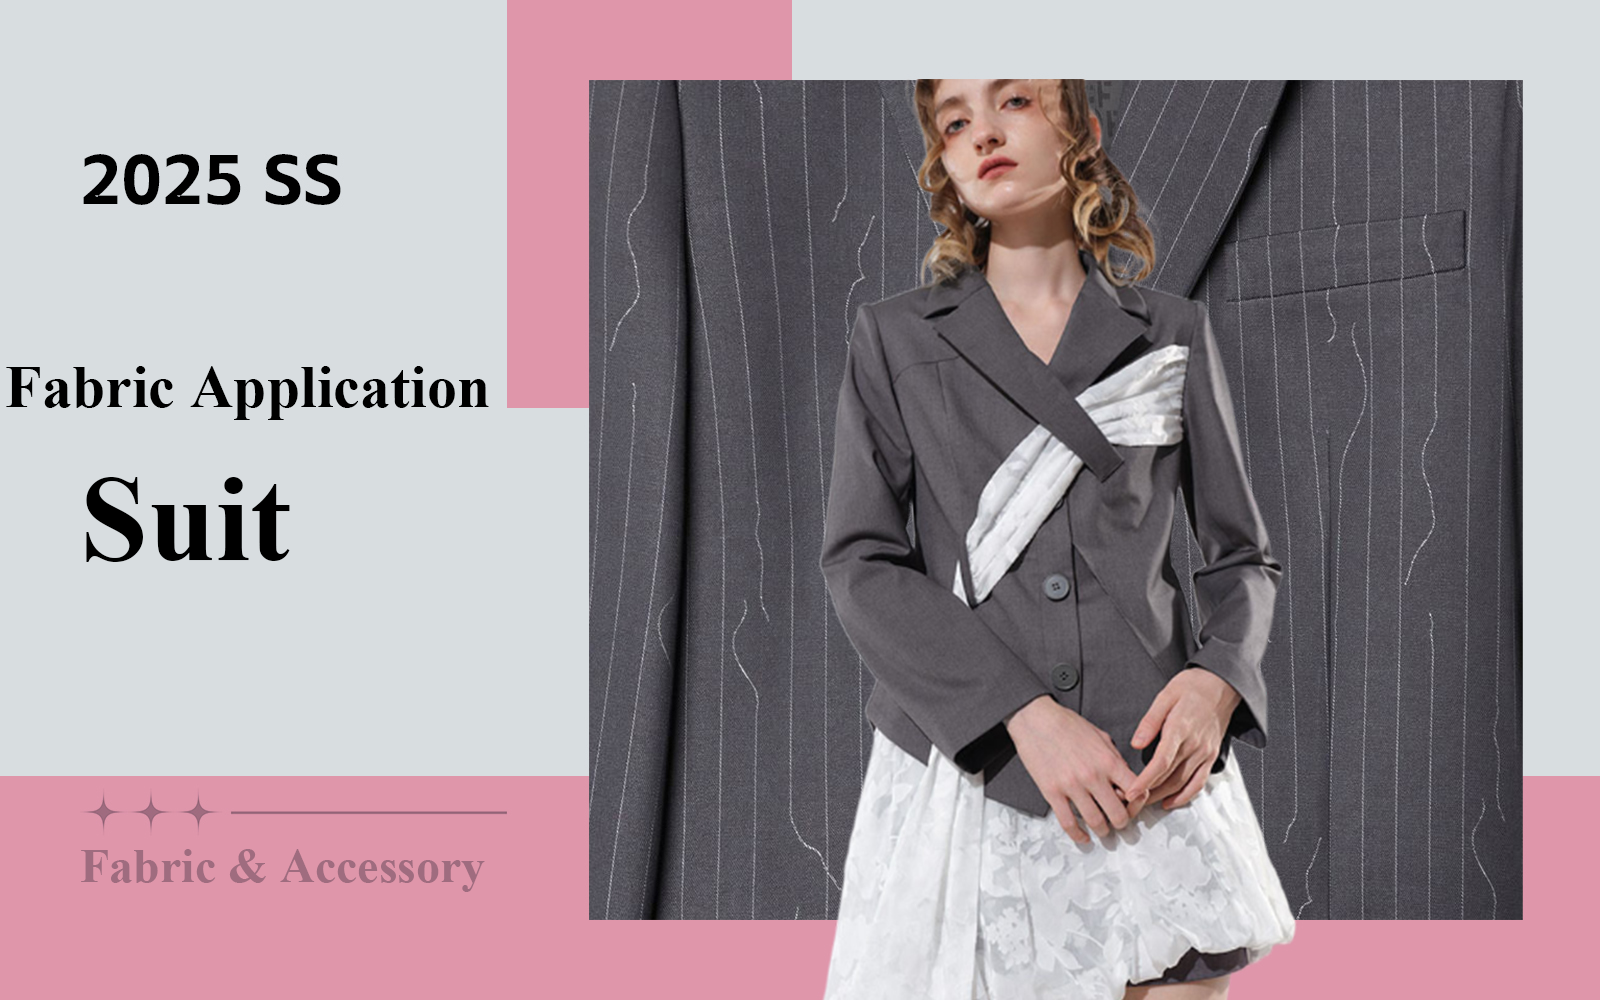 Personalized Fashion -- The Fabric Trend for Women's Suit